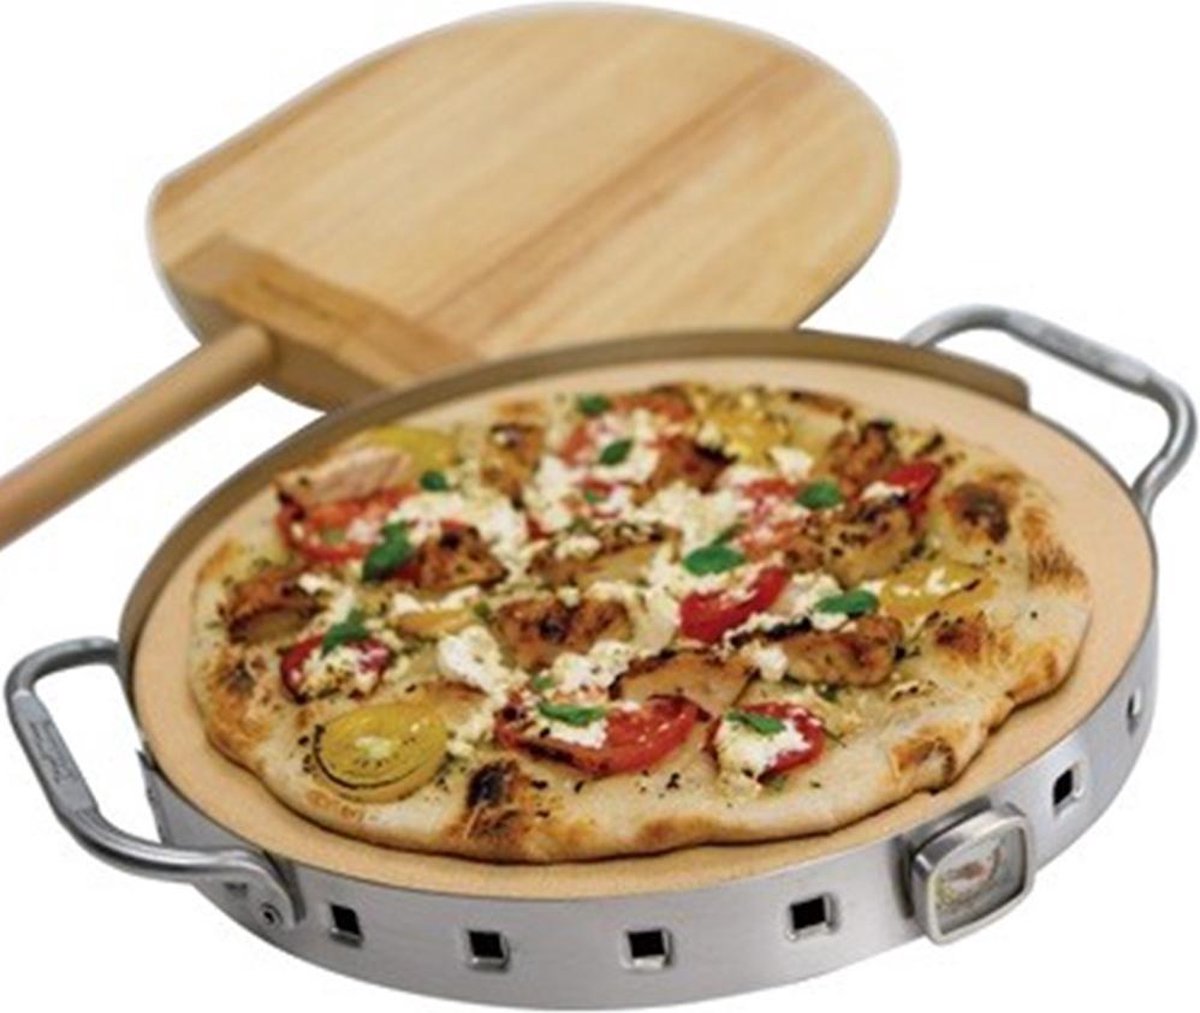 Broil King pizza grill set